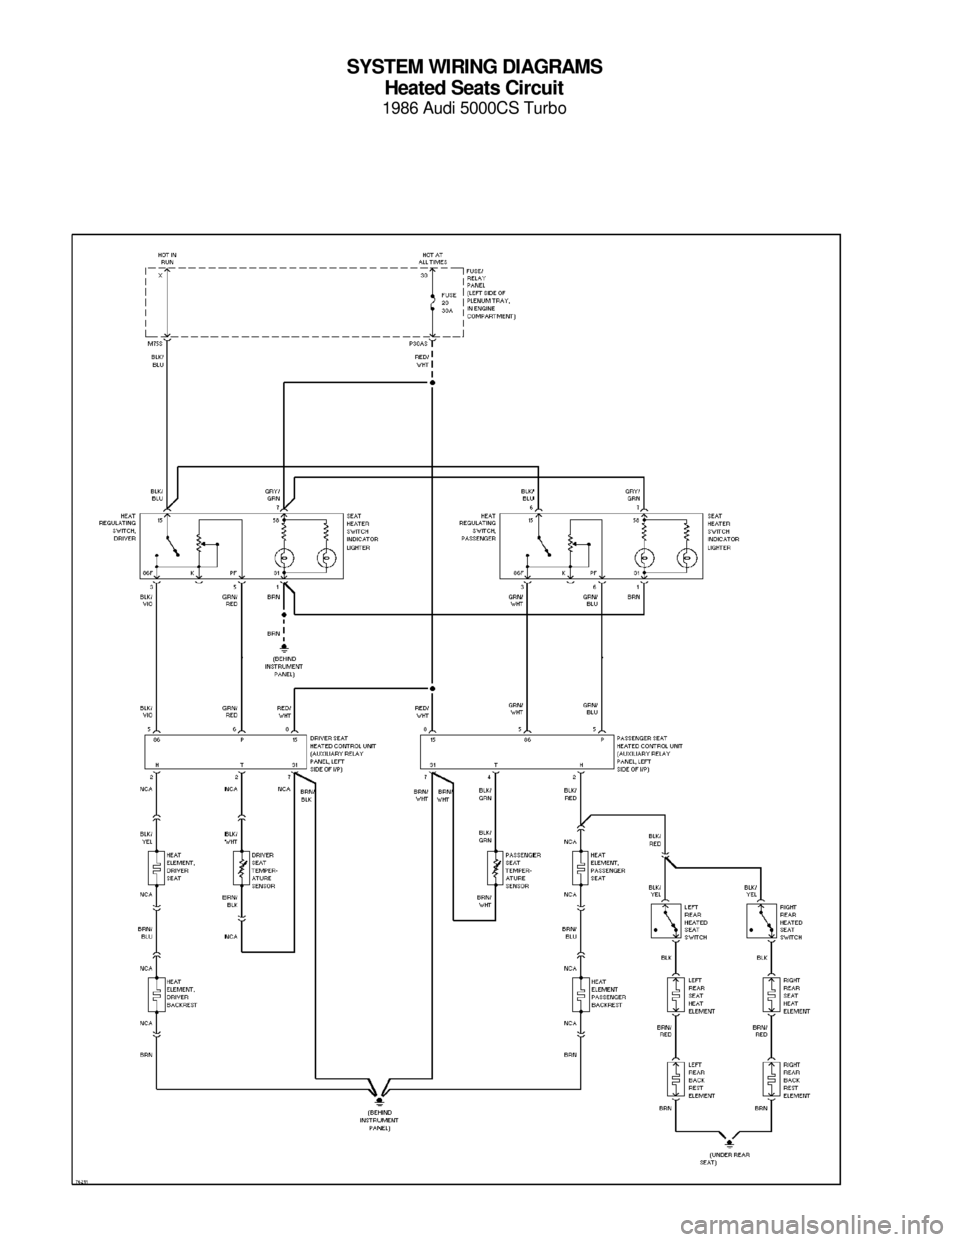 AUDI 5000CS 1986 C2 System Wiring Diagram SYSTEM WIRING DIAGRAMS
Heated Seats Circuit
1986 Audi 5000CS Turbo
For x    
Copyright © 1998 Mitchell Repair Information Company, LLCMonday, July 19, 2004  05:52PM 